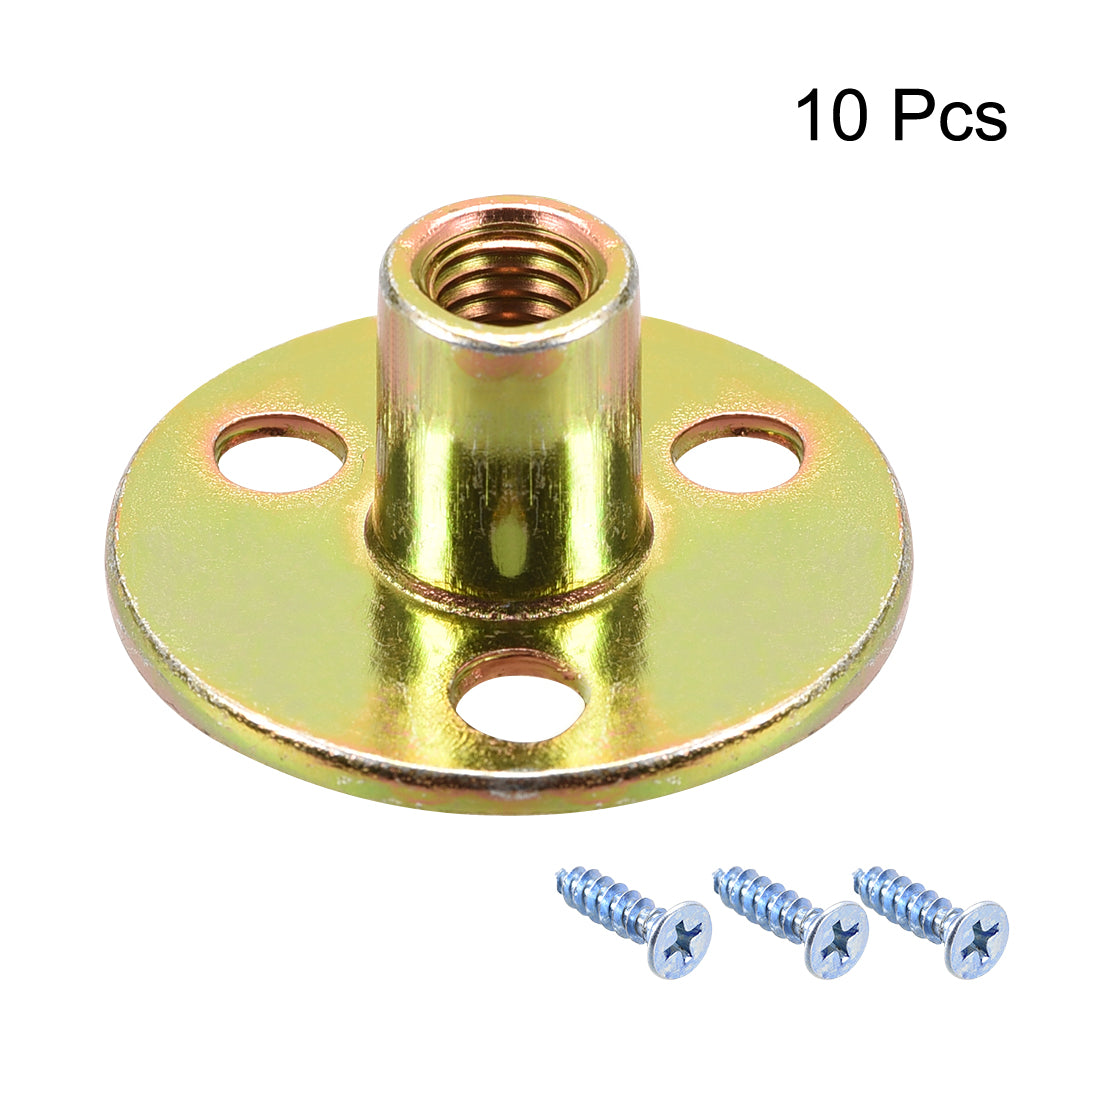 Uxcell Uxcell M10 Brad Hole Tee Nut Carbon Steel T-Nuts Furniture Hardware Flange Insert Female Thread with Screws 10pcs